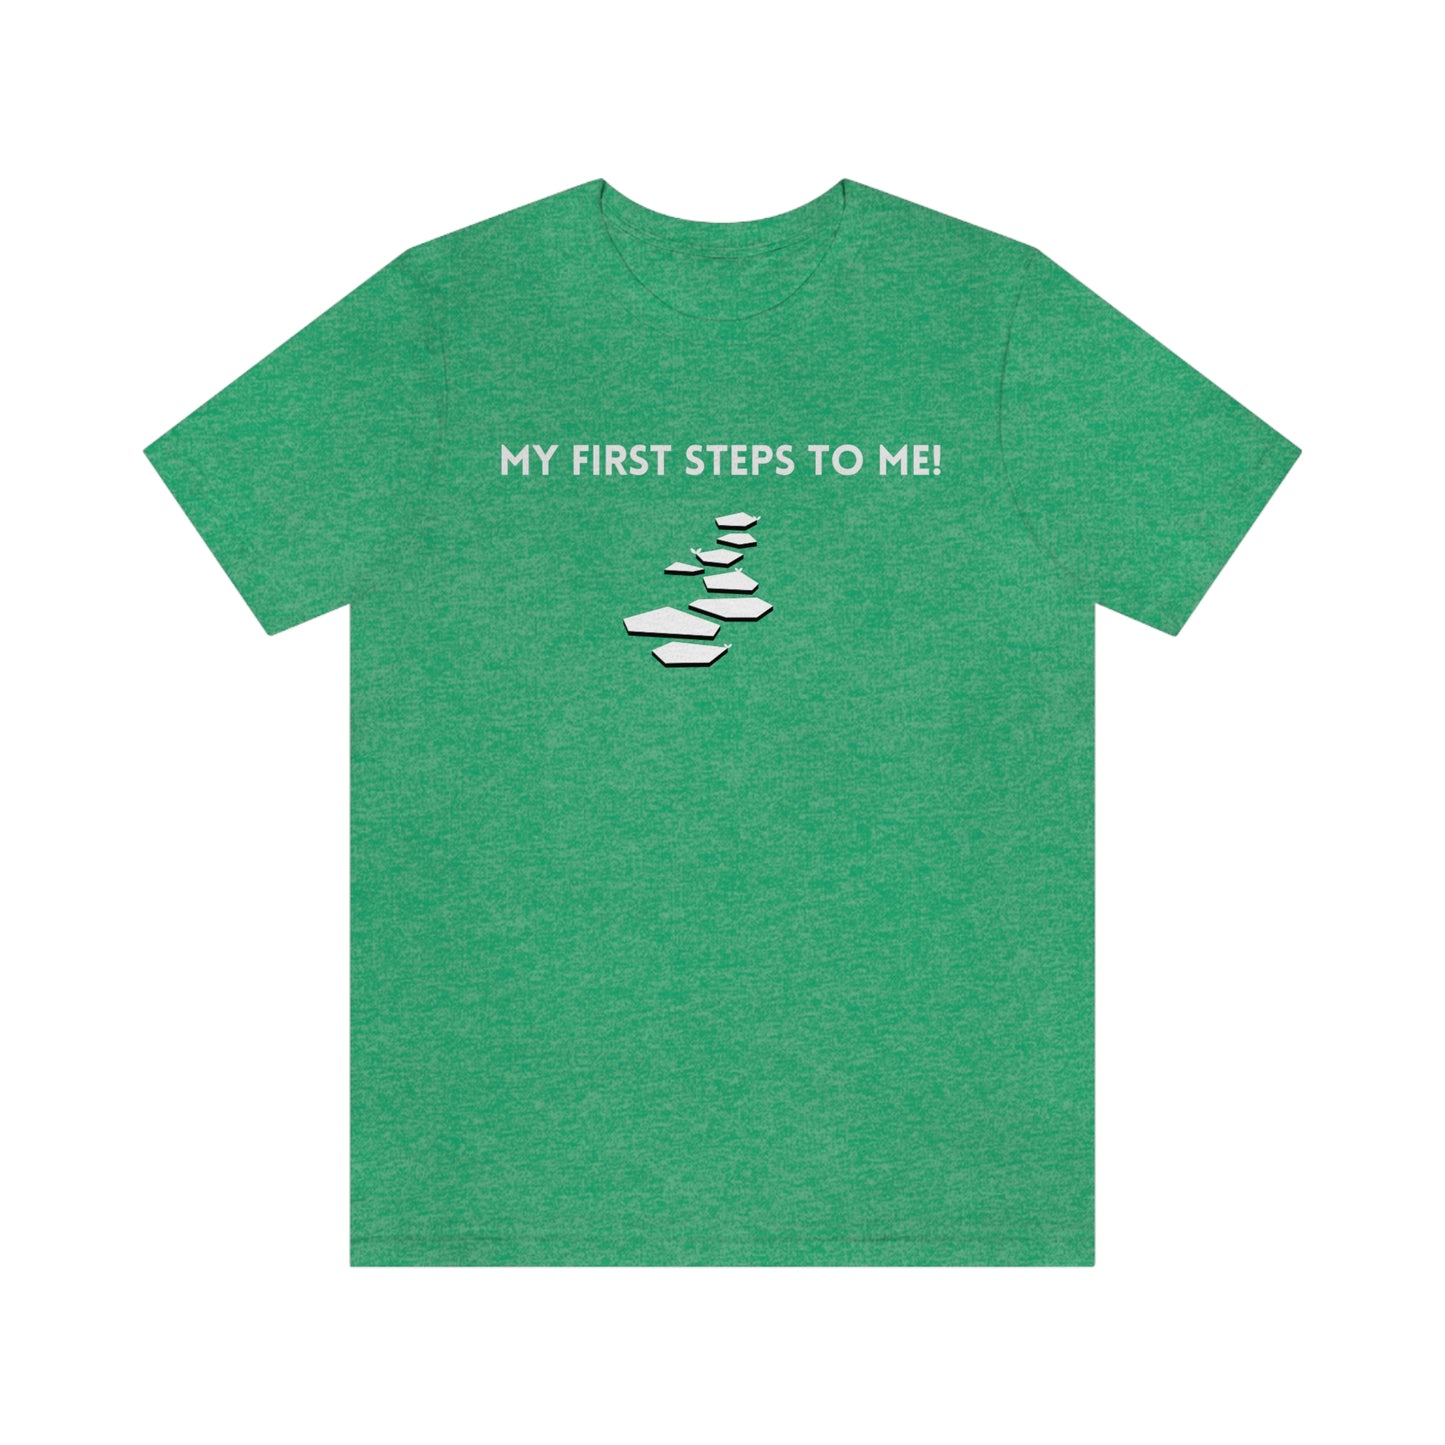 My first steps to me t shirt inspirational words on a tshirt t shirt gift to encourage self affirming words on a t shirt